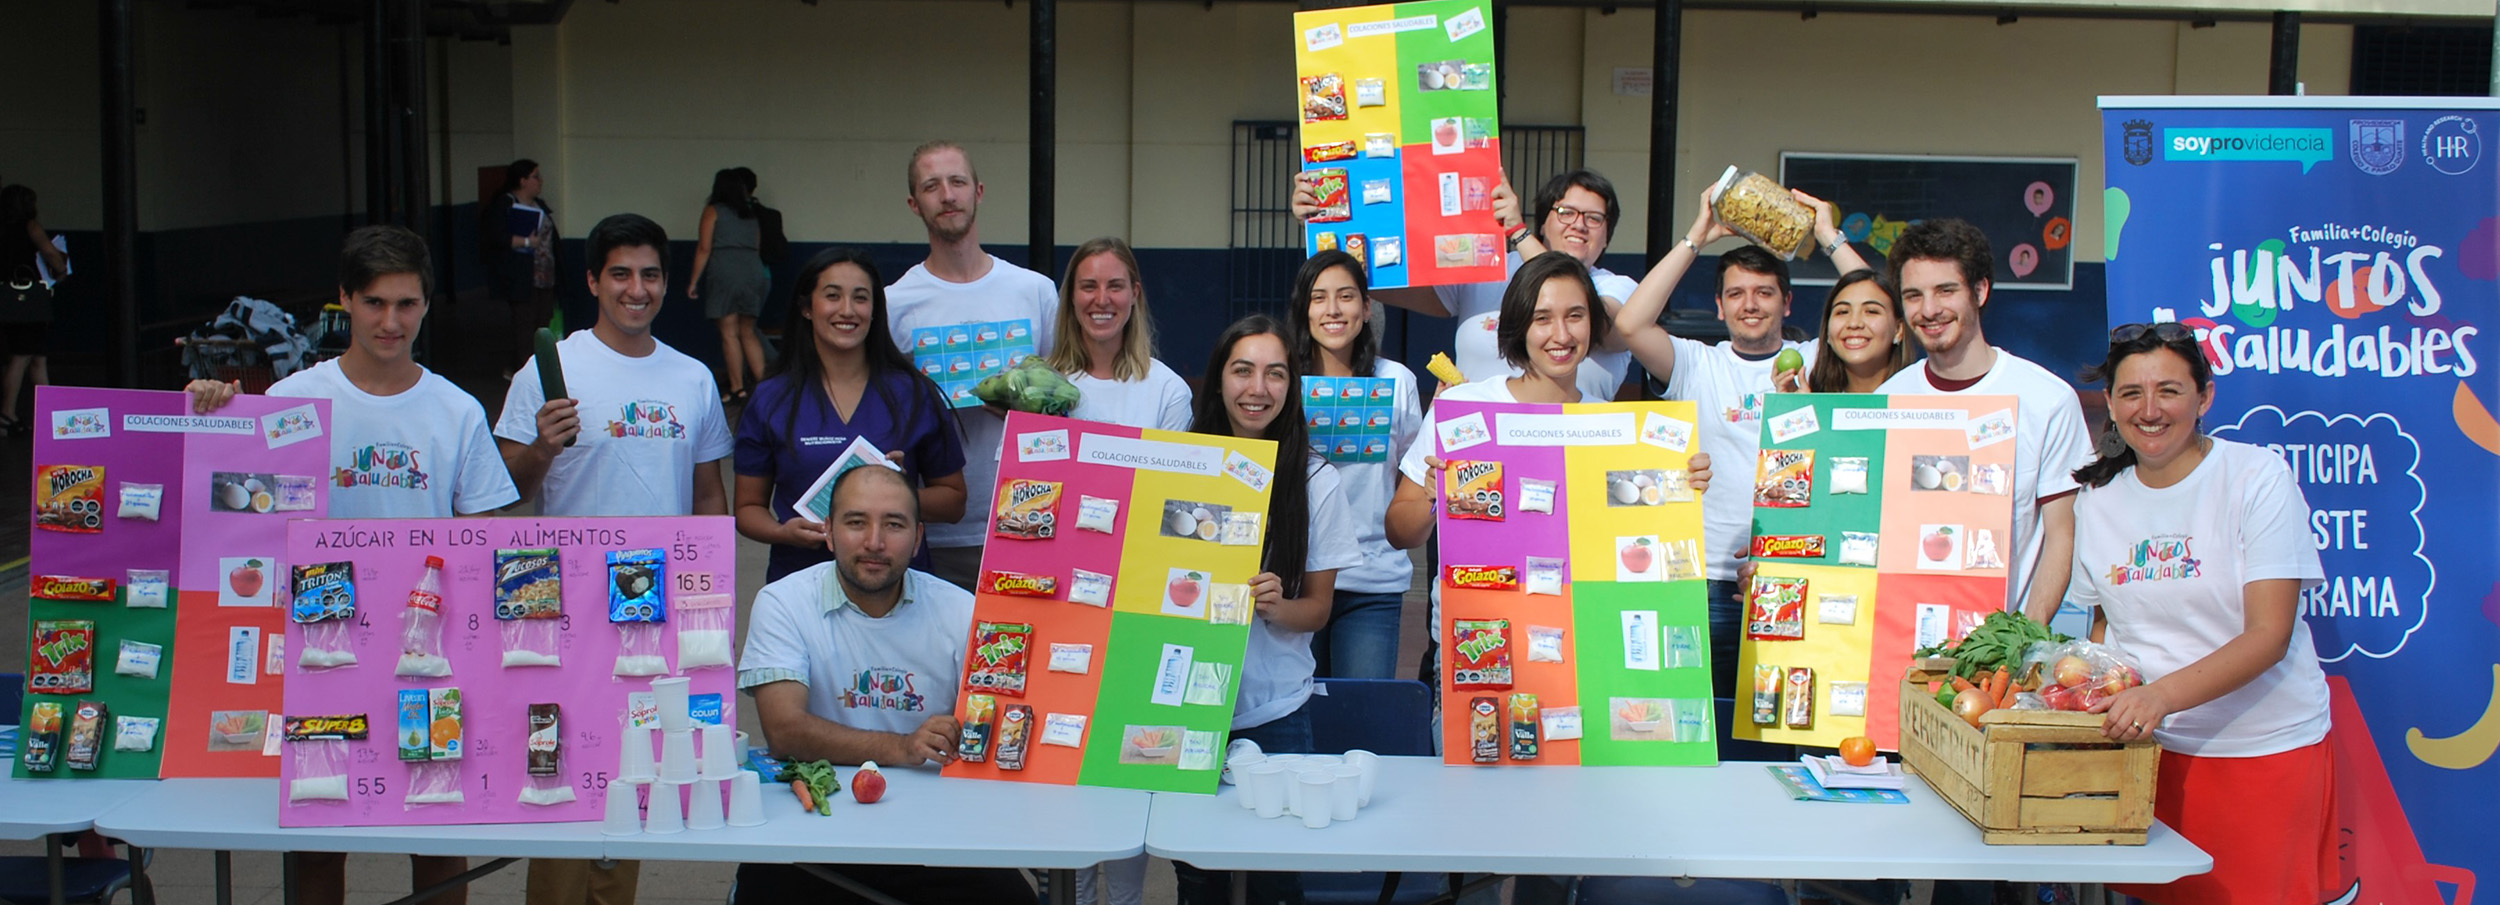 ¡Juntos+Saludables!: Promoting physical and mental health among children and their families in Chile